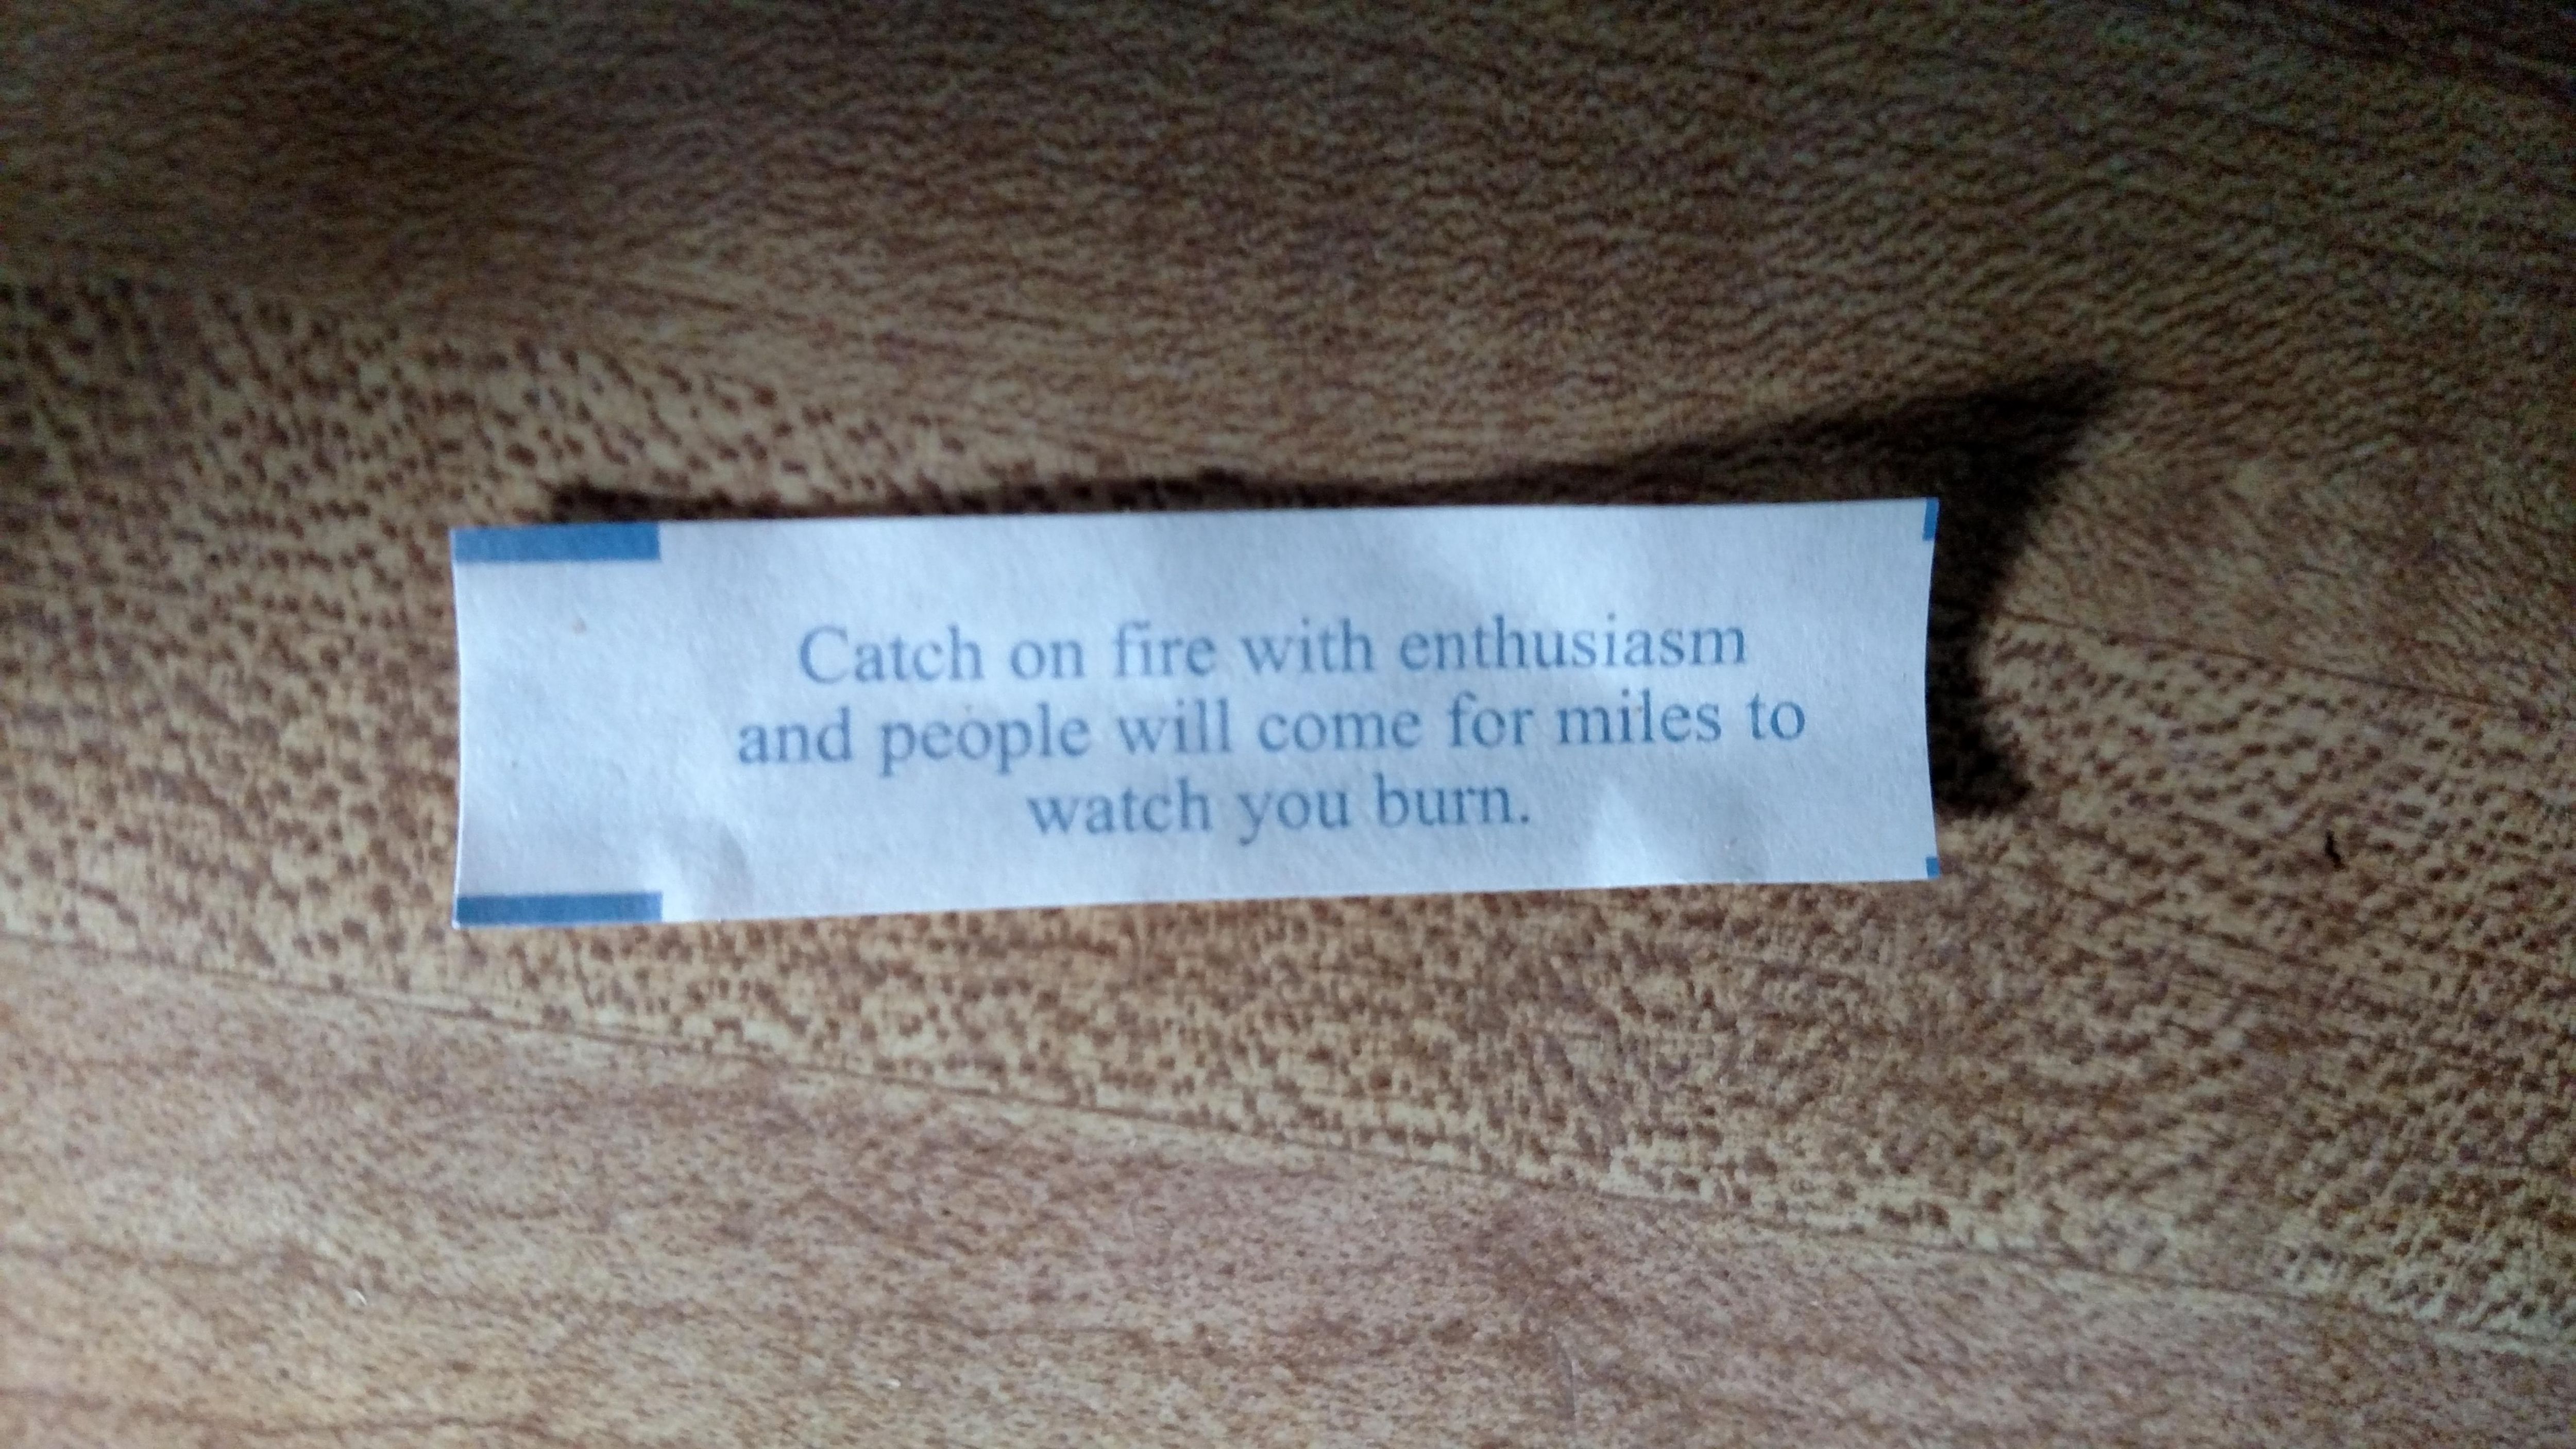 The deepest fortune cookie I've ever received.